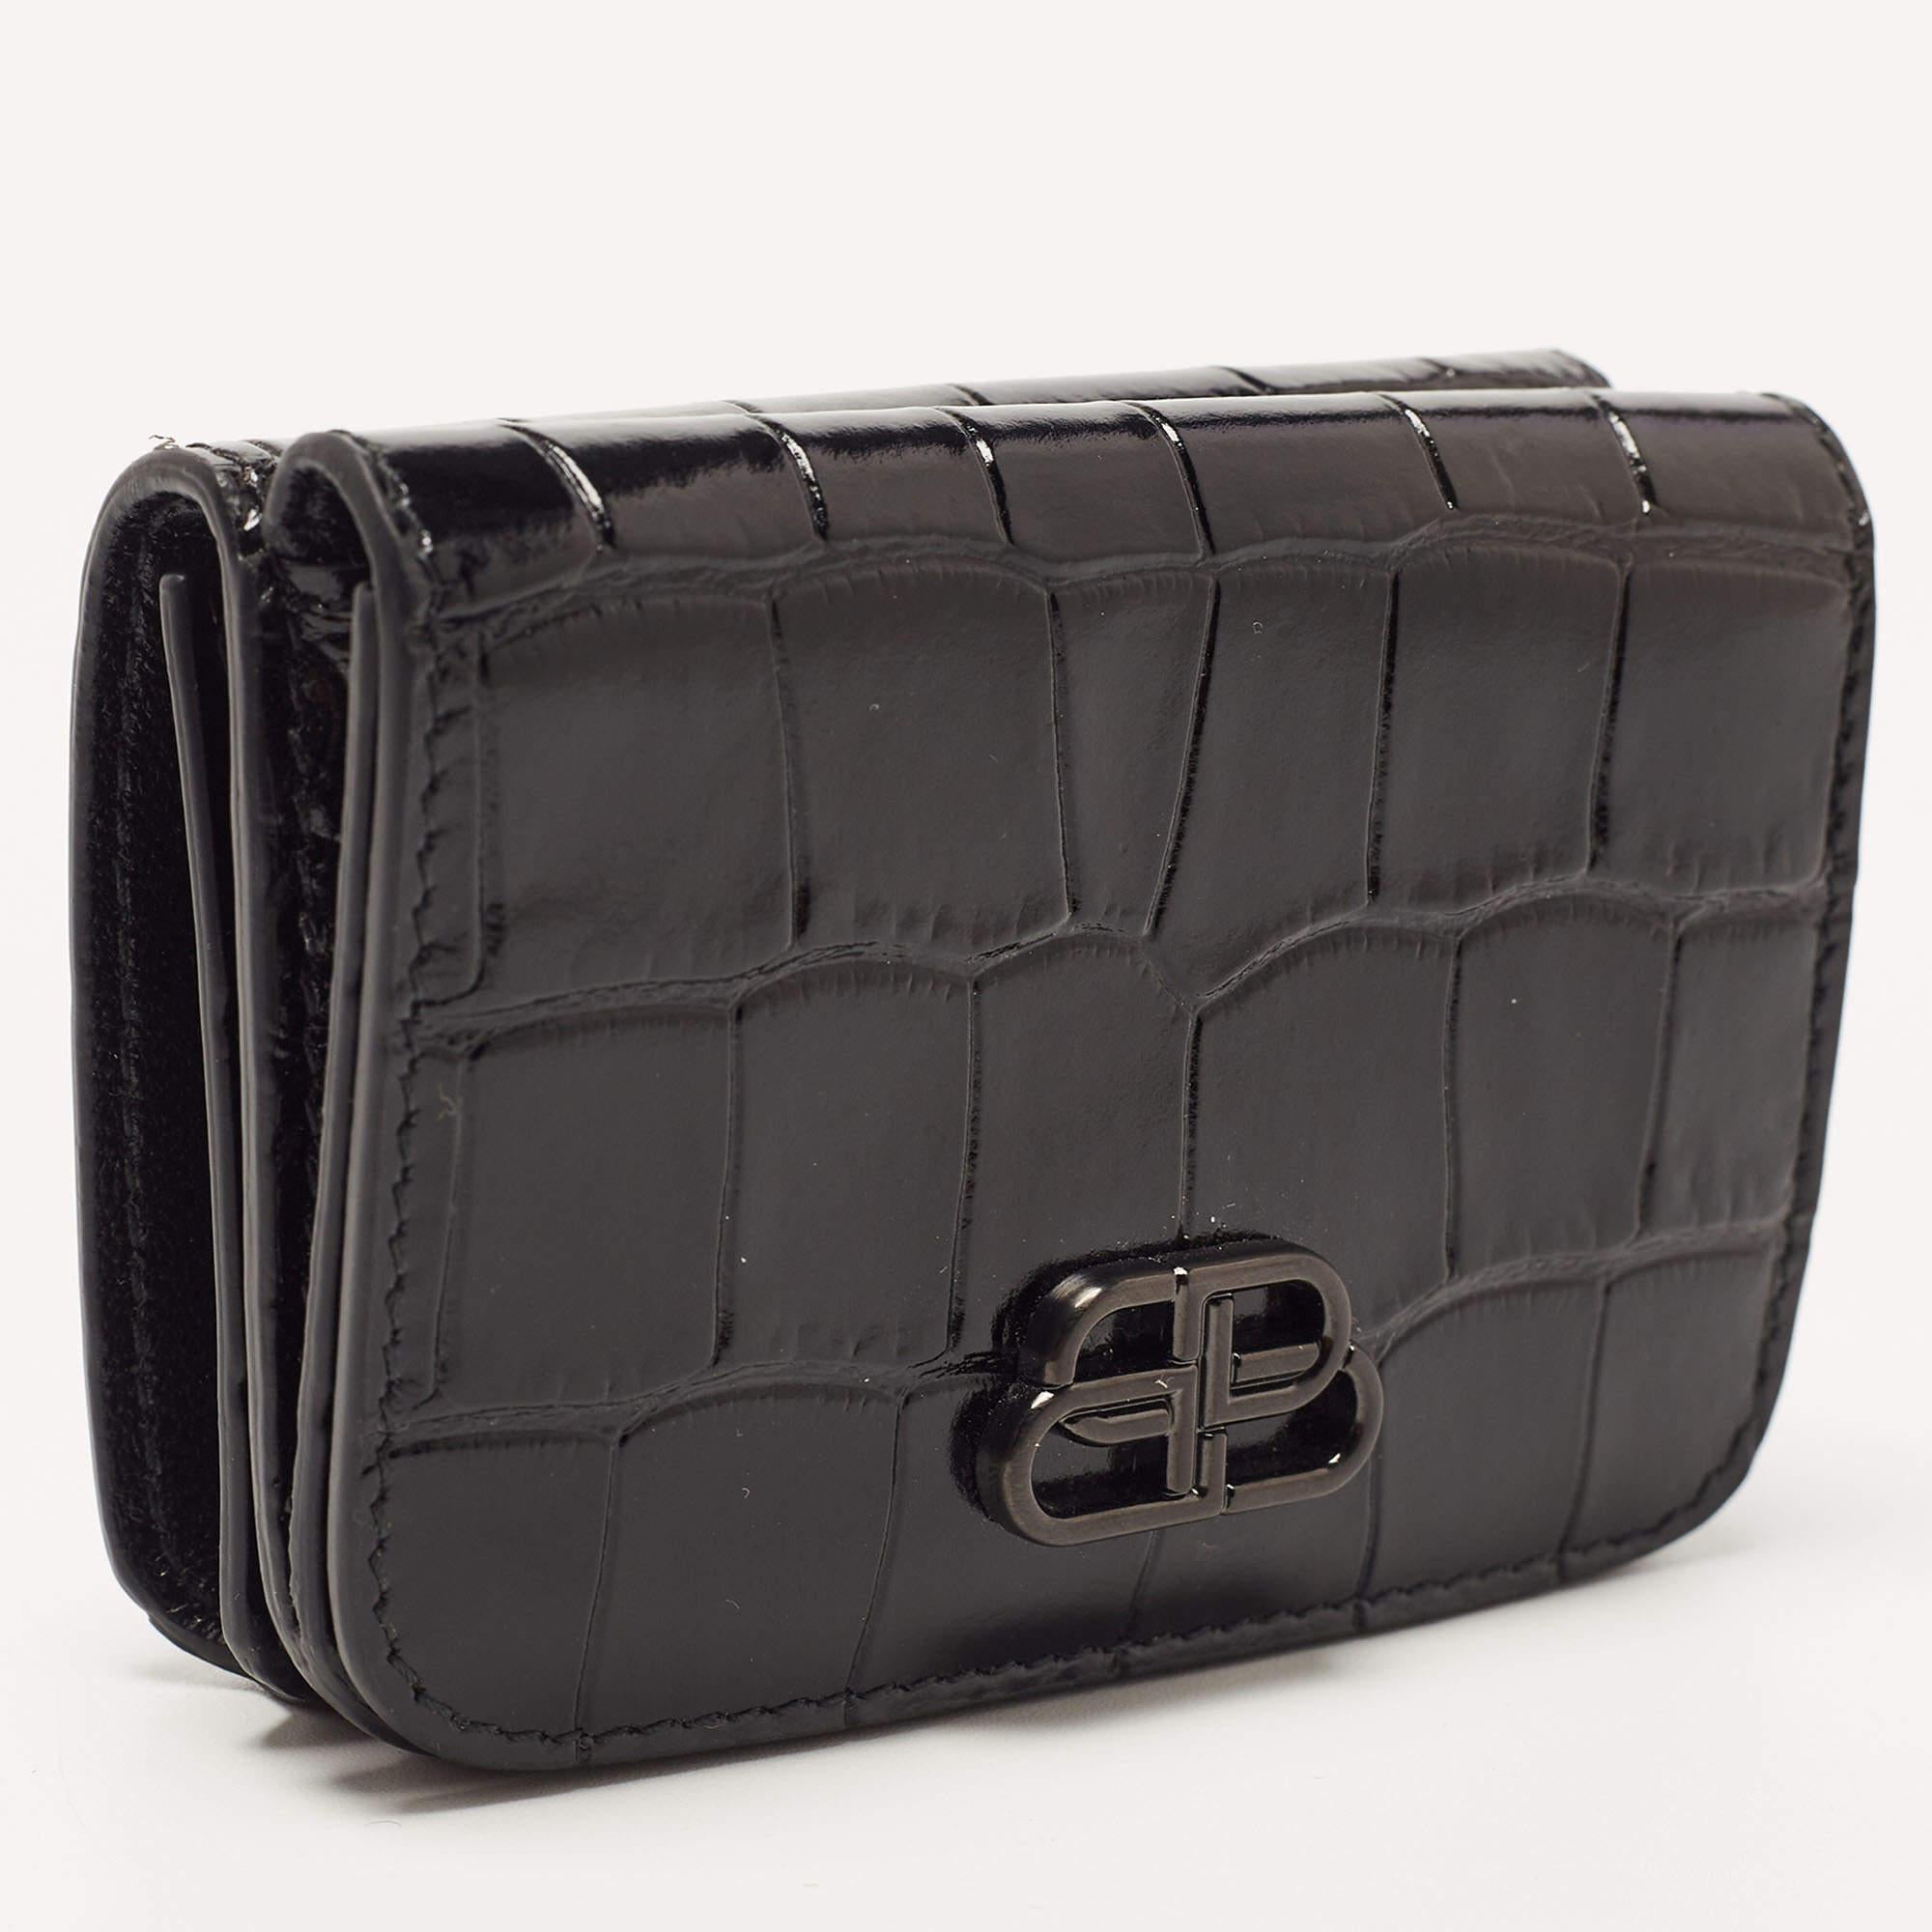 This Balenciaga wallet is an immaculate balance of sophistication and rational utility. It has been designed using prime quality materials and elevated by a sleek finish. The creation is equipped with ample space for your monetary essentials.

